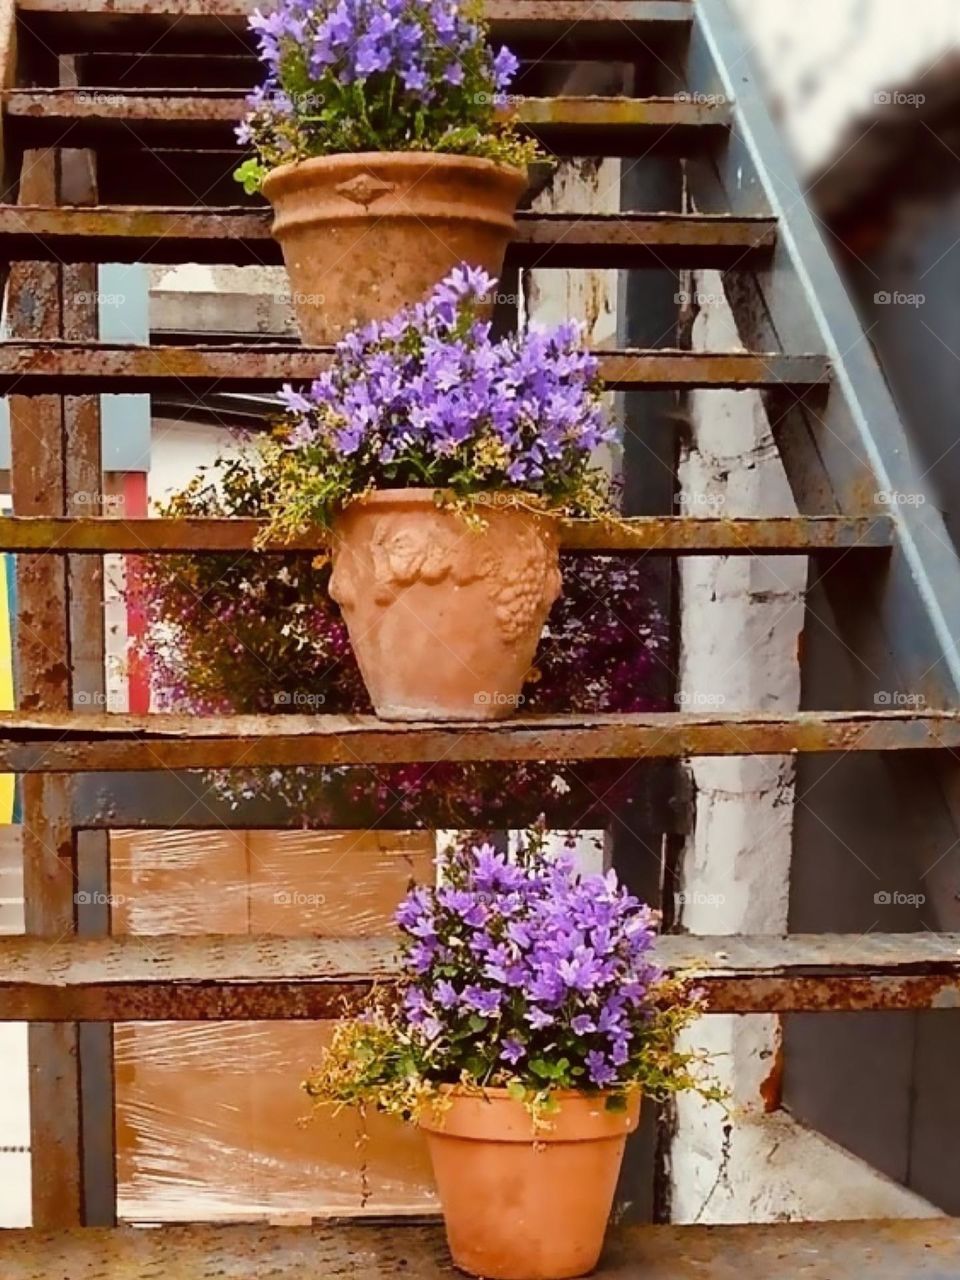 Purple flower pots on the stairs